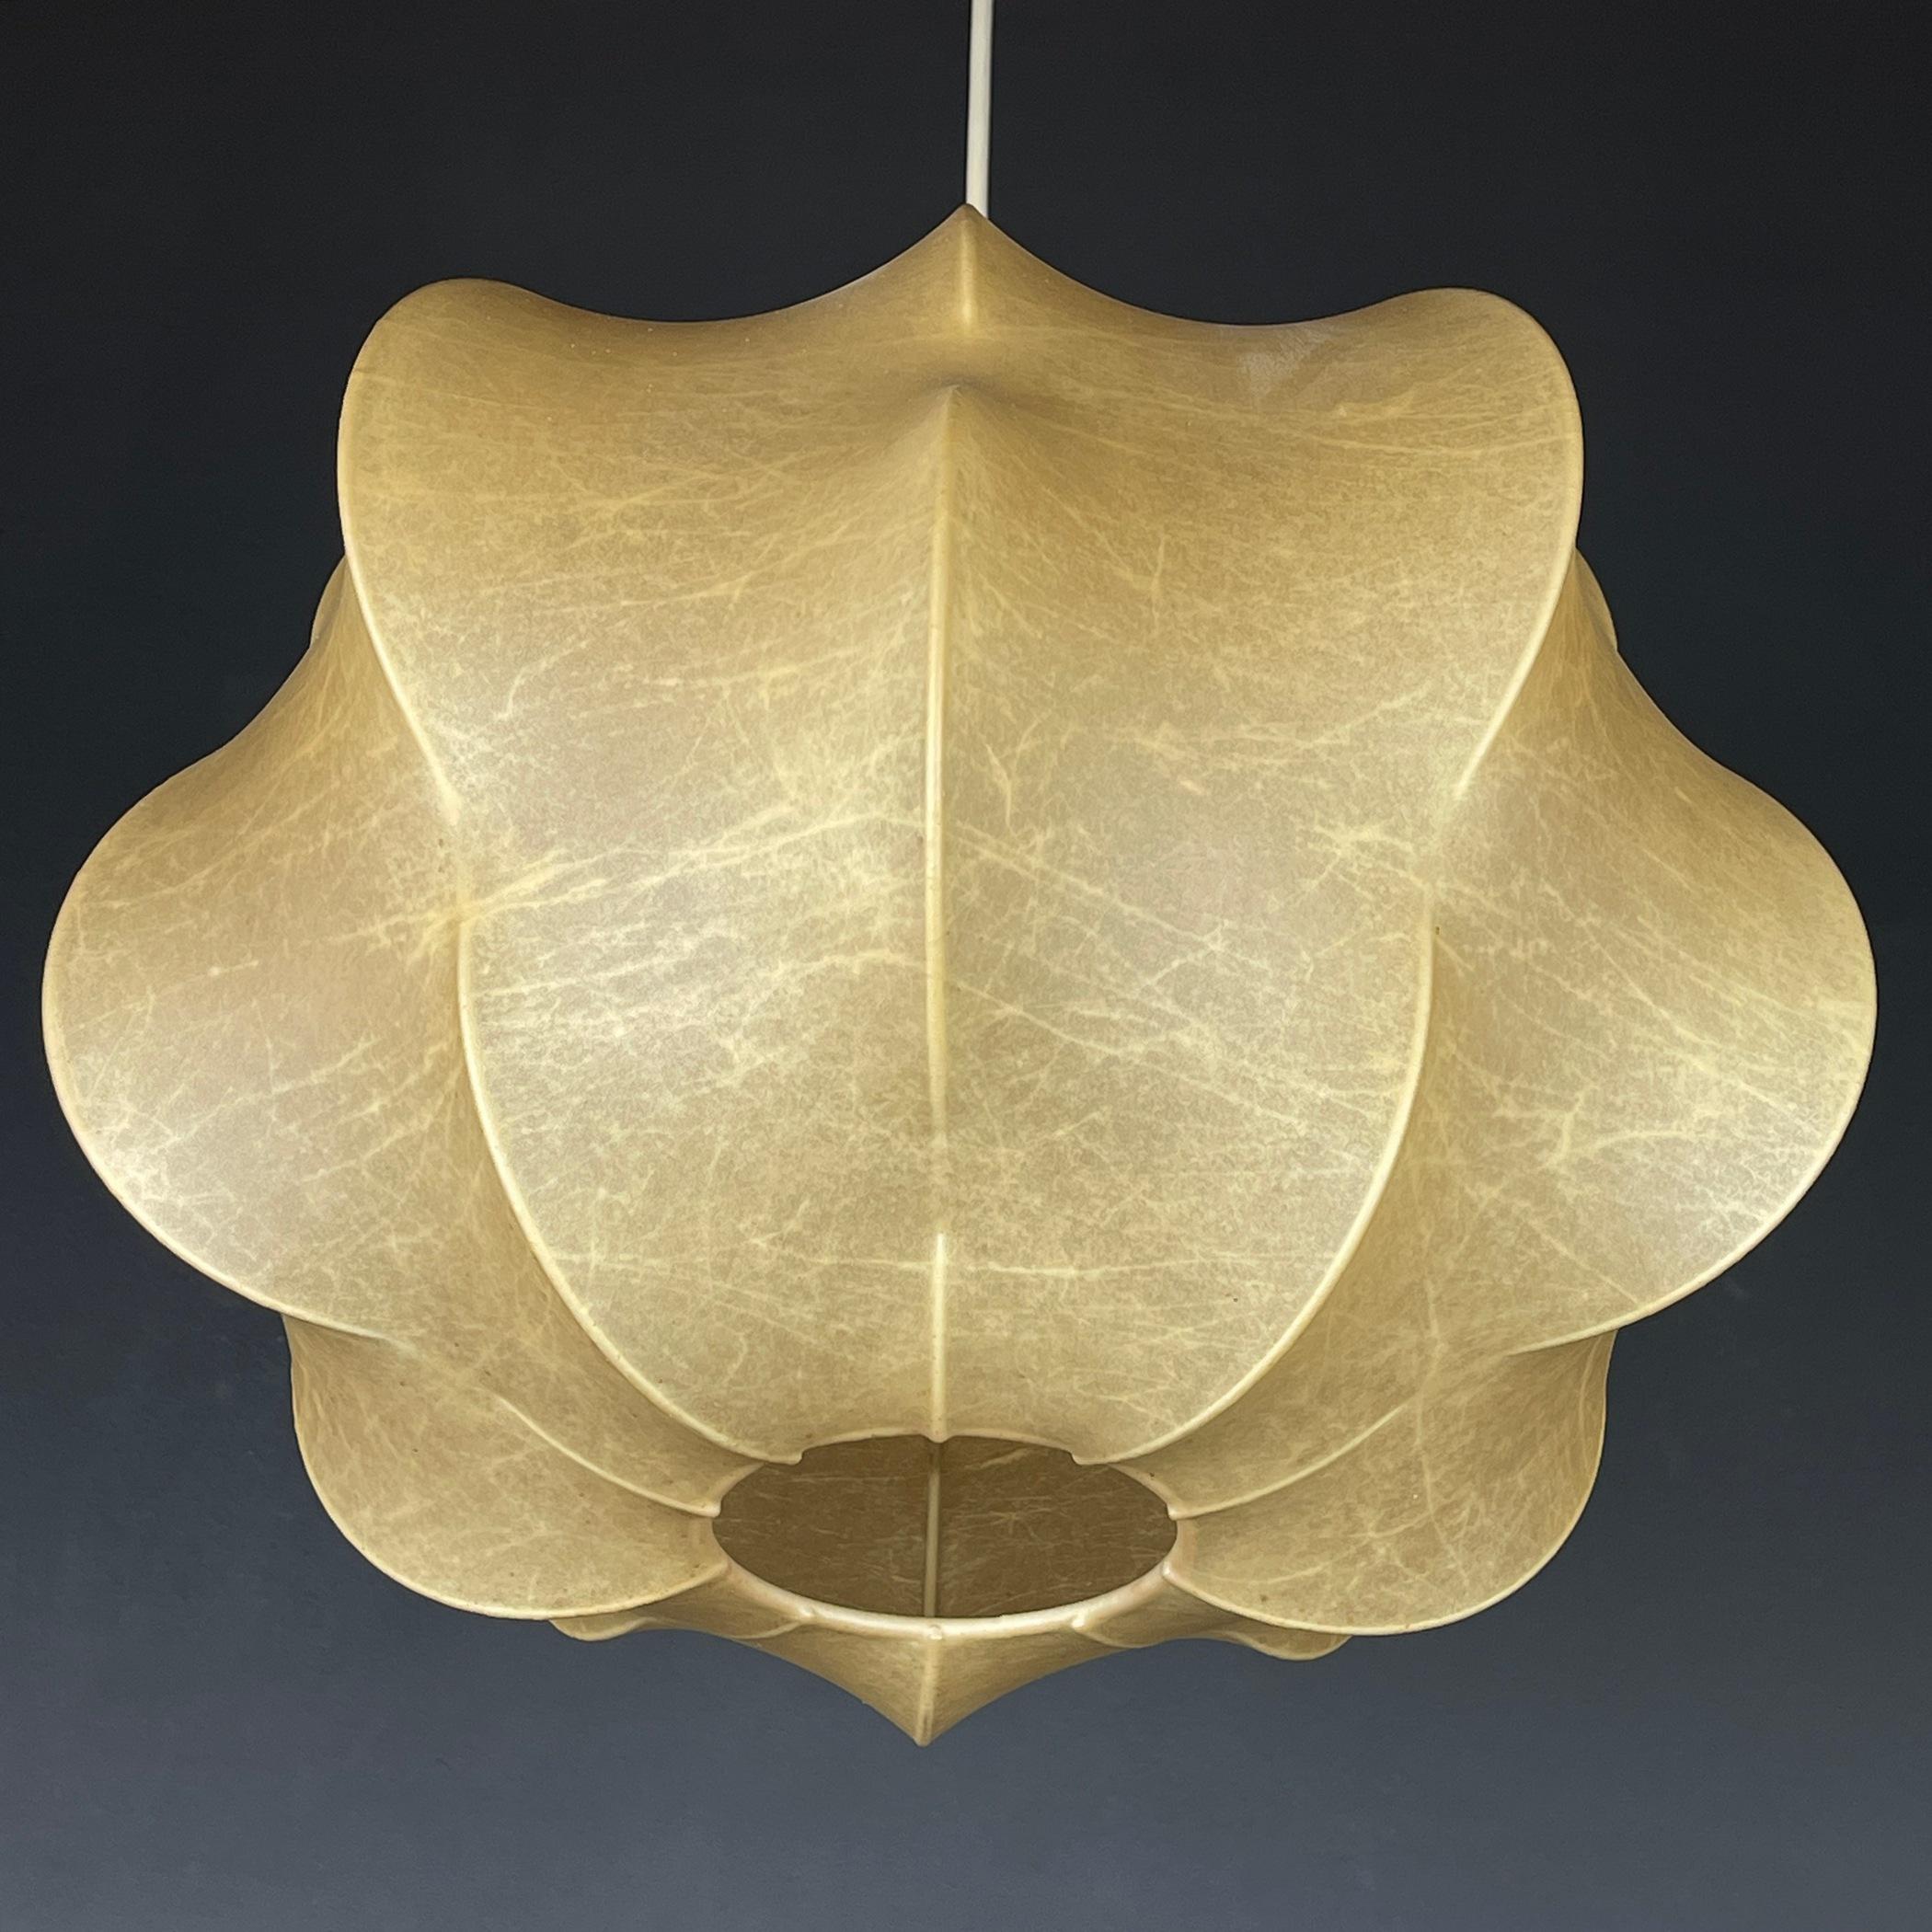 Plastic Nuvola Cocoon Chandelier by Tobia Scarpa for Flos, Italy 1962 For Sale